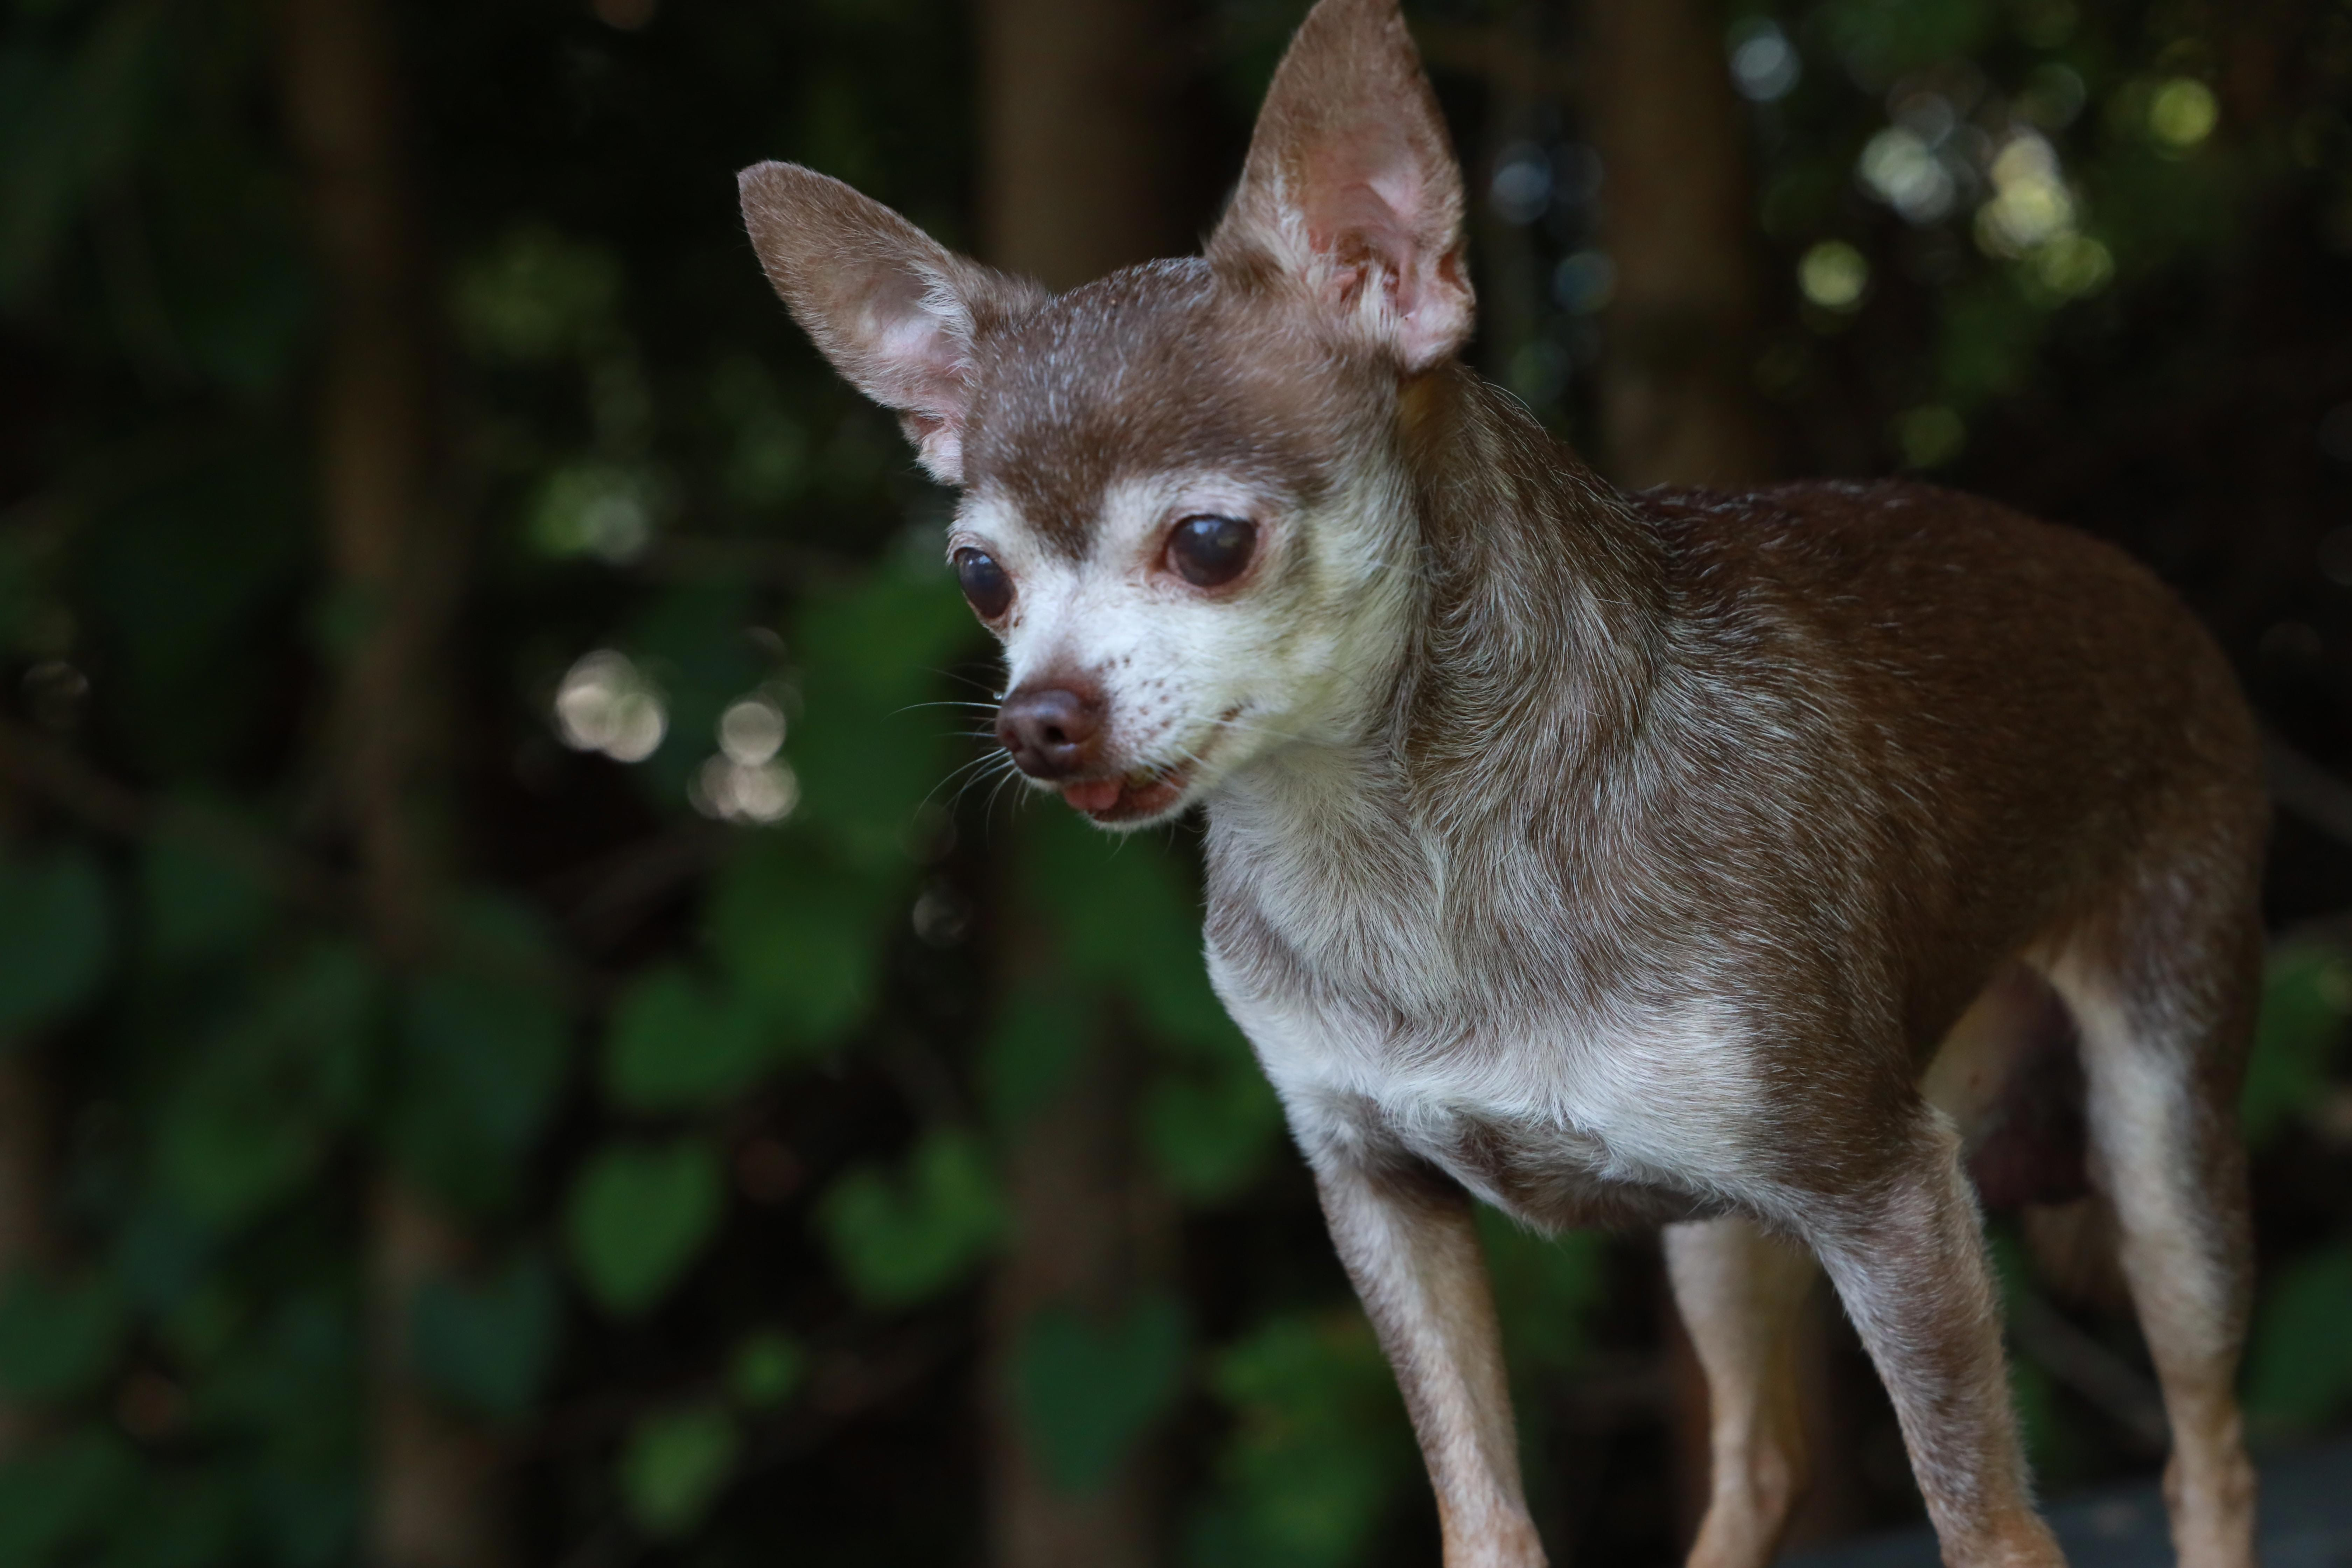 Explore the Different Types of Chihuahuas - Get to Know the Varieties of this Popular Dog Breed